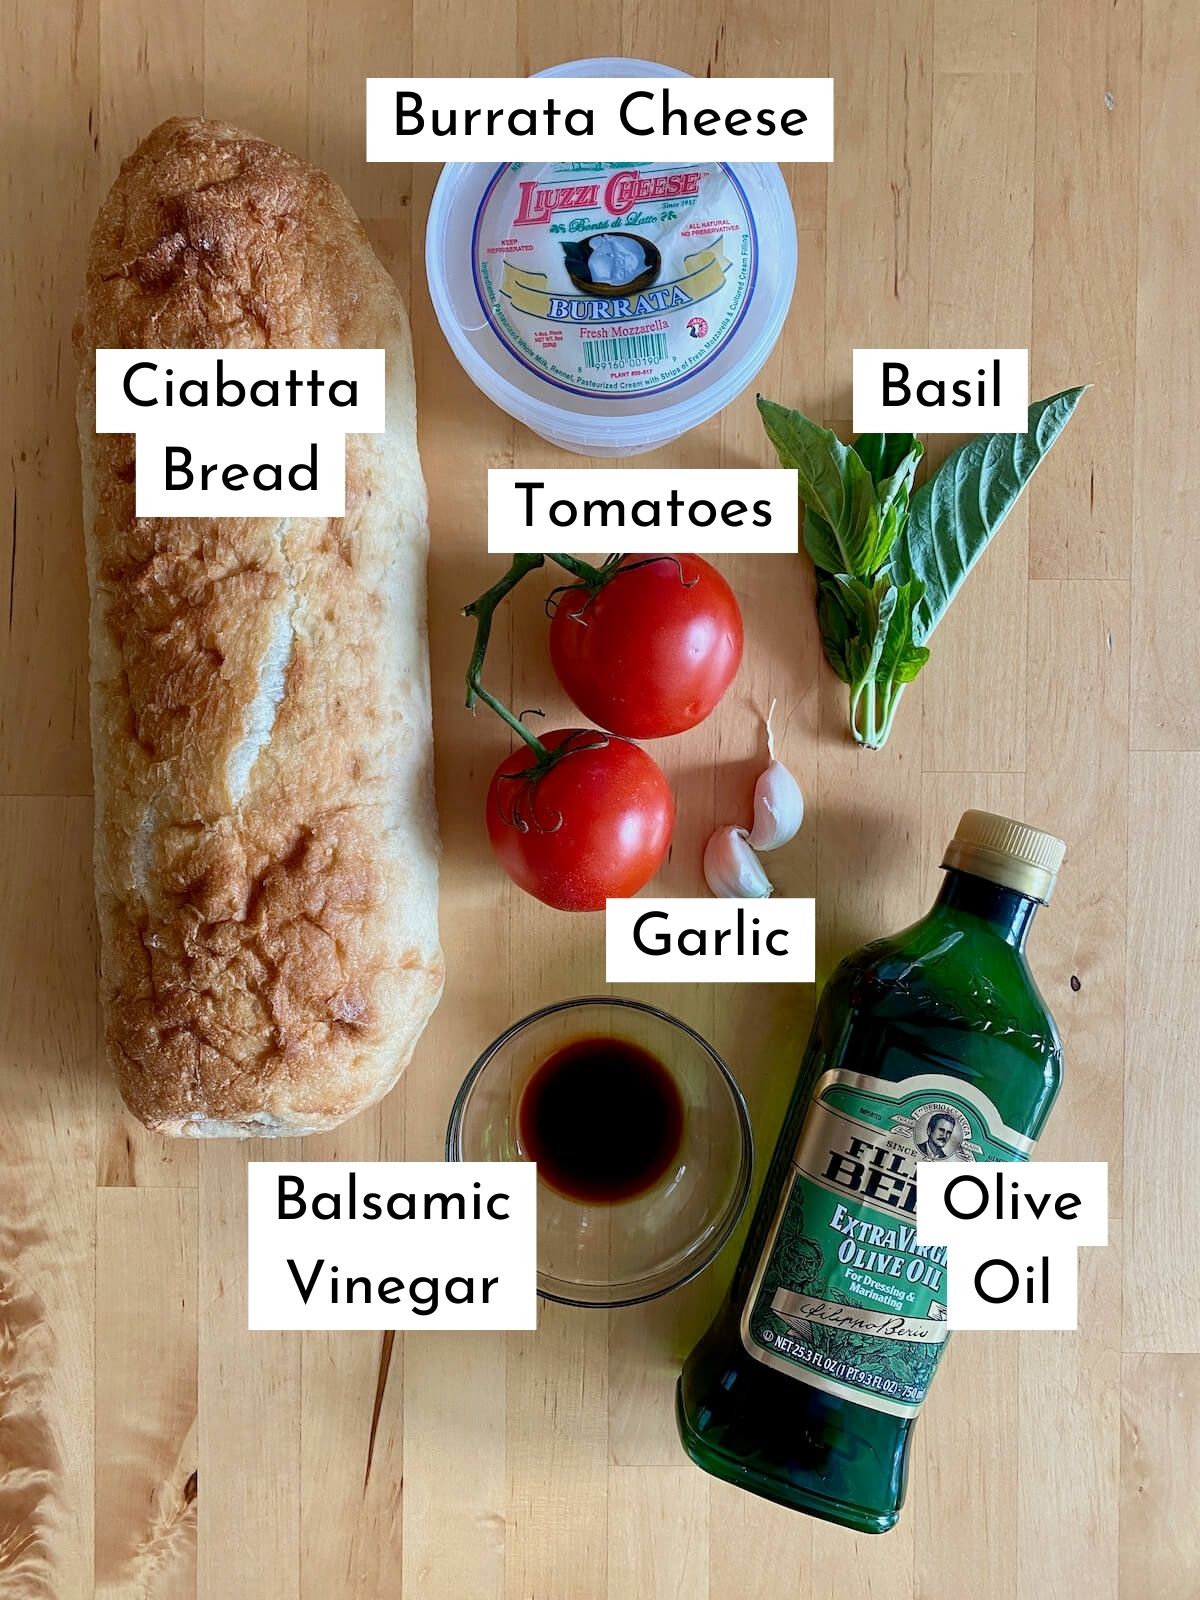 The ingredients to make burrata bruschetta. Each ingredient is labeled with text. They include ciabatta bread, burrata cheese, tomatoes, basil, garlic, balsamic vinegar, and olive oil.